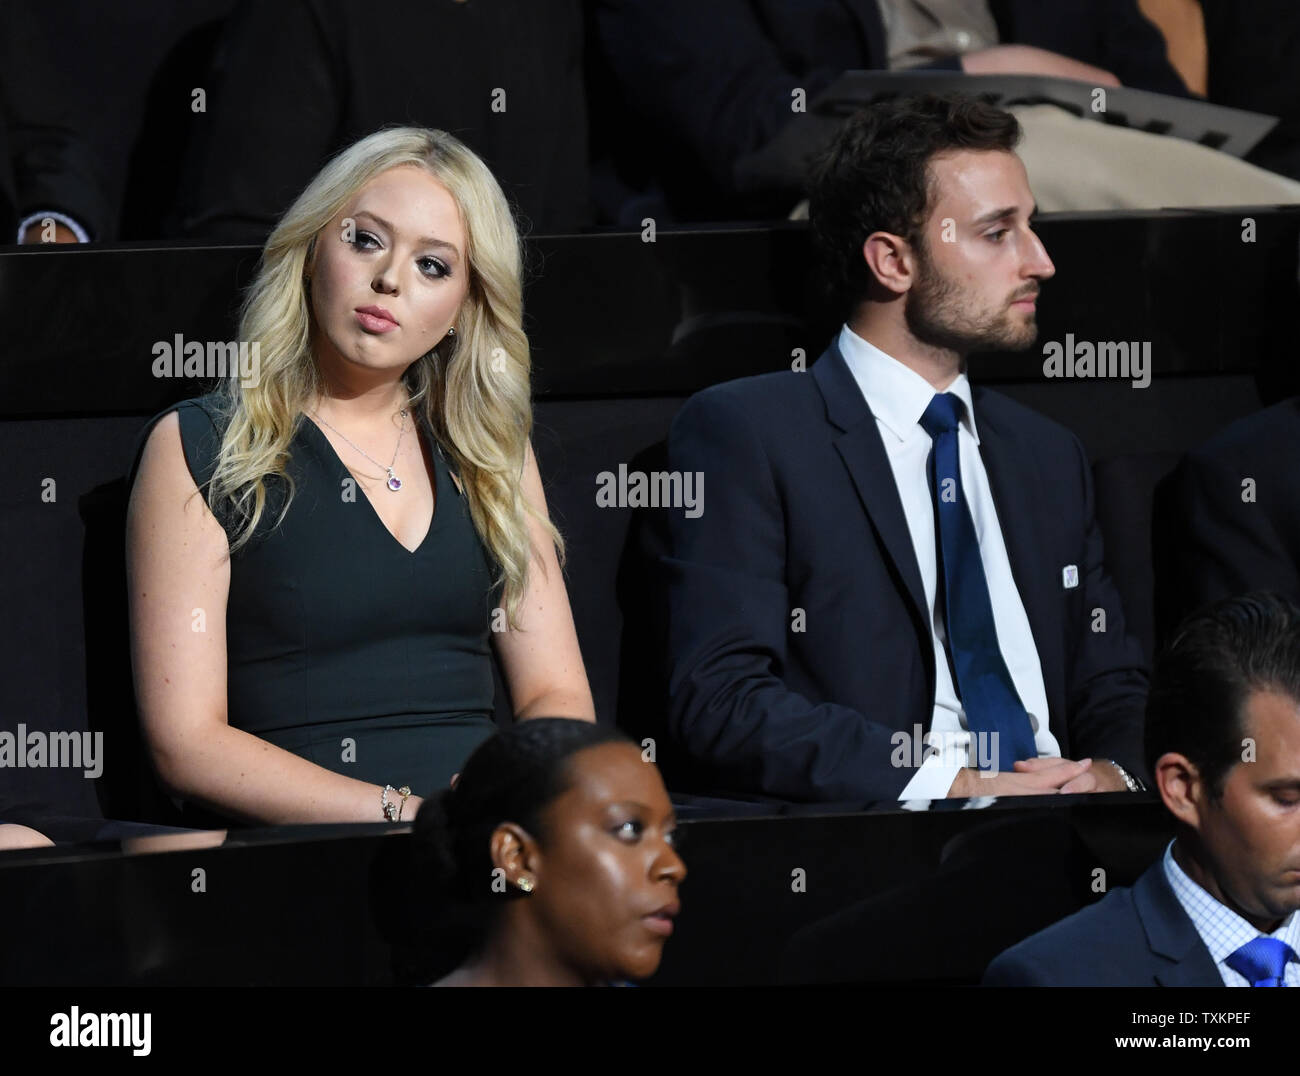 Tiffany Trump, daughter of Donald Trump and Marla Maples, sits in a box at the evening session on day one at the Republican National Convention at Quicken Loans Arena in Cleveland, Ohio on July 18, 2016.  Donald Trump will formally accept the Republican Party's nomination for President on Thursday night July 21st.  Photo by Pat Benic/UPI Stock Photo